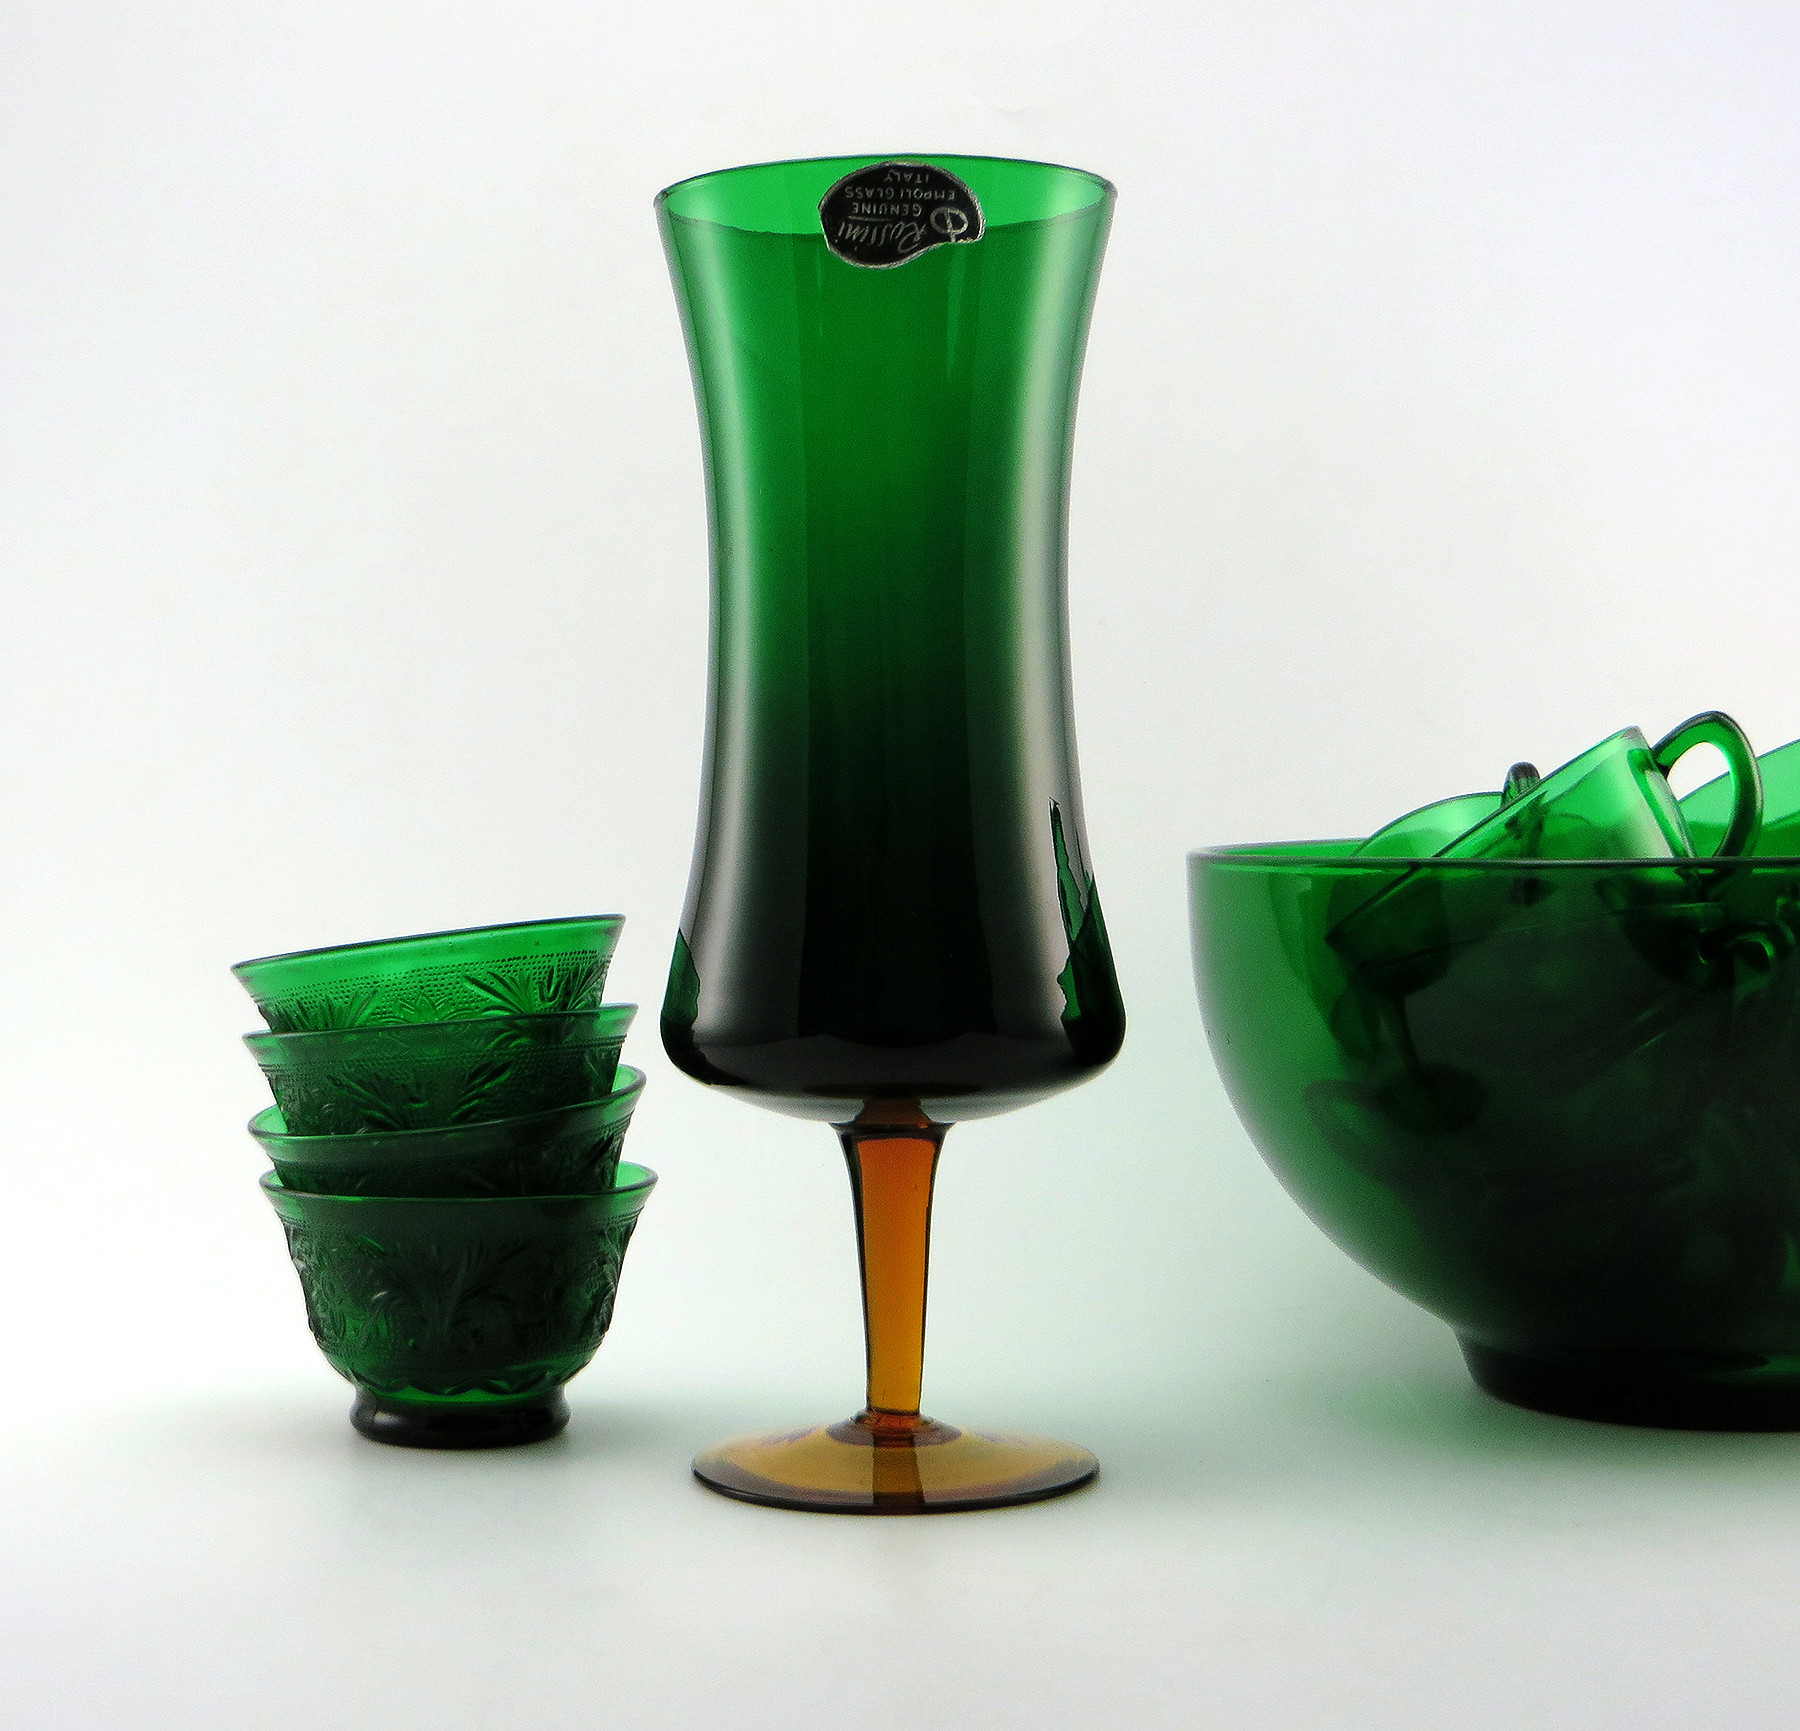 29 Fashionable Blown Glass Vases Made In Italy 2024 free download blown glass vases made in italy of rossini empoli art glass retro modern vase with label retro art glass within rossini empoli art glass retro modern vase with label